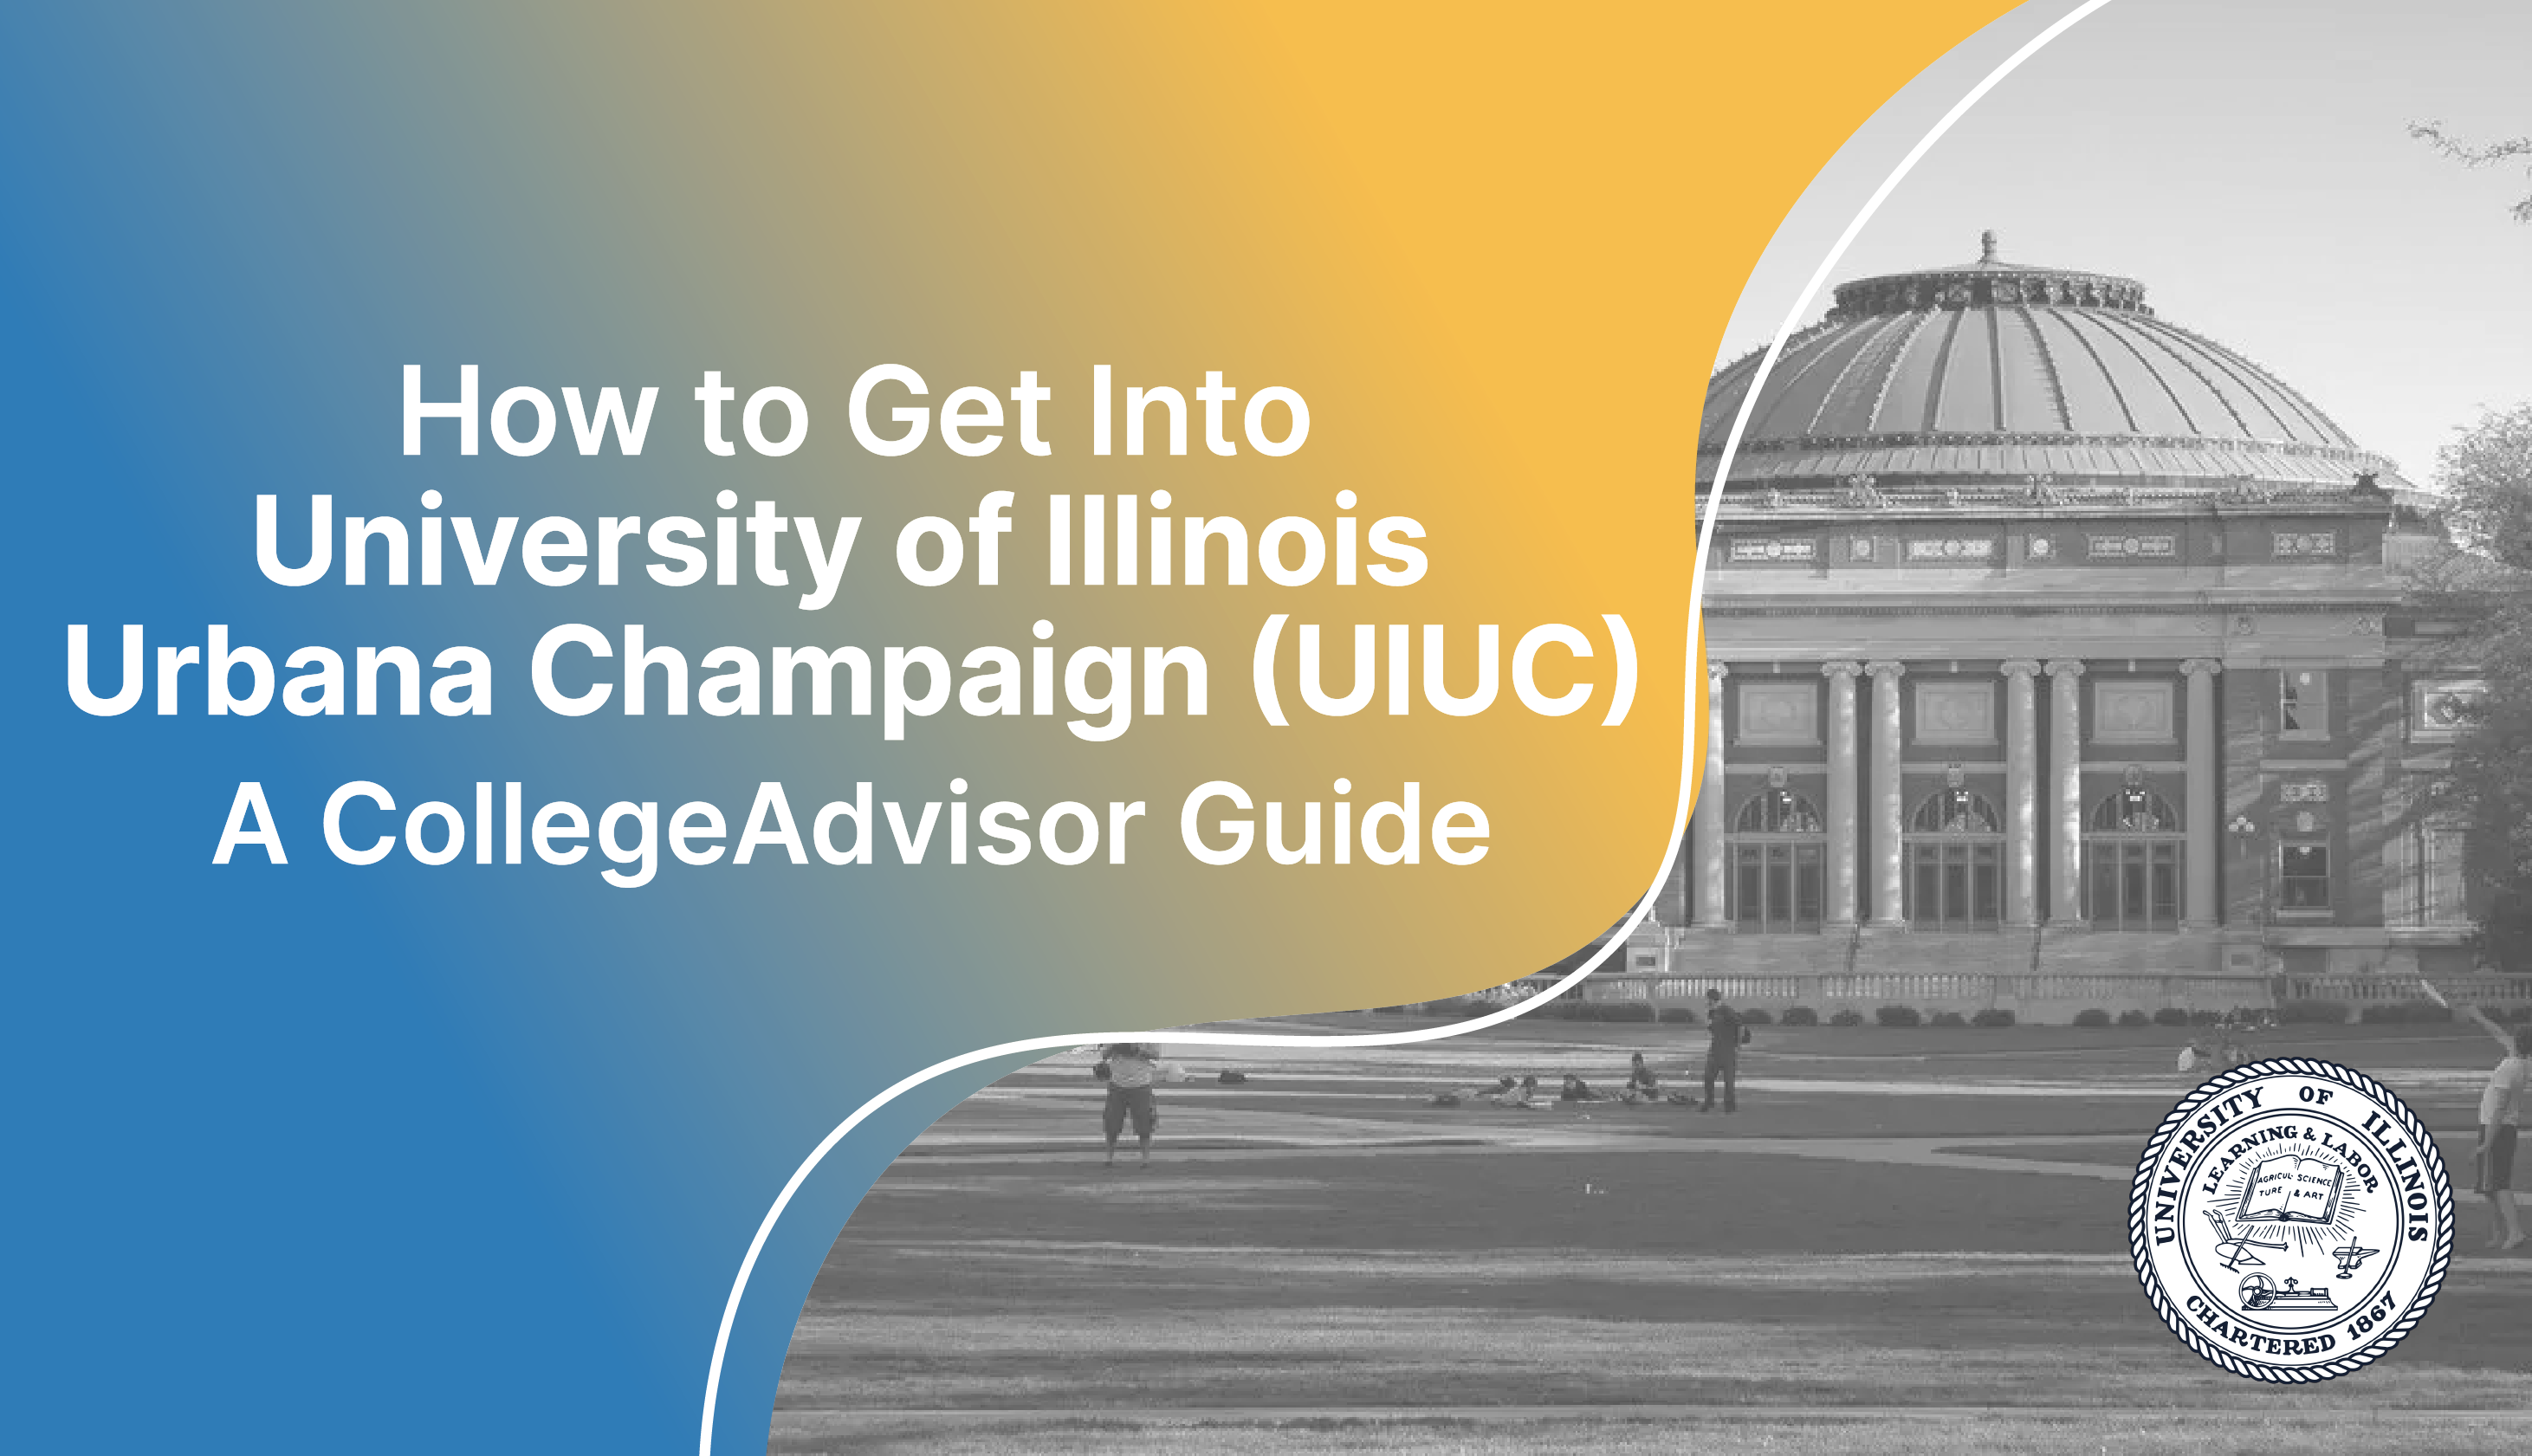 How to Get Into UIUC Guide